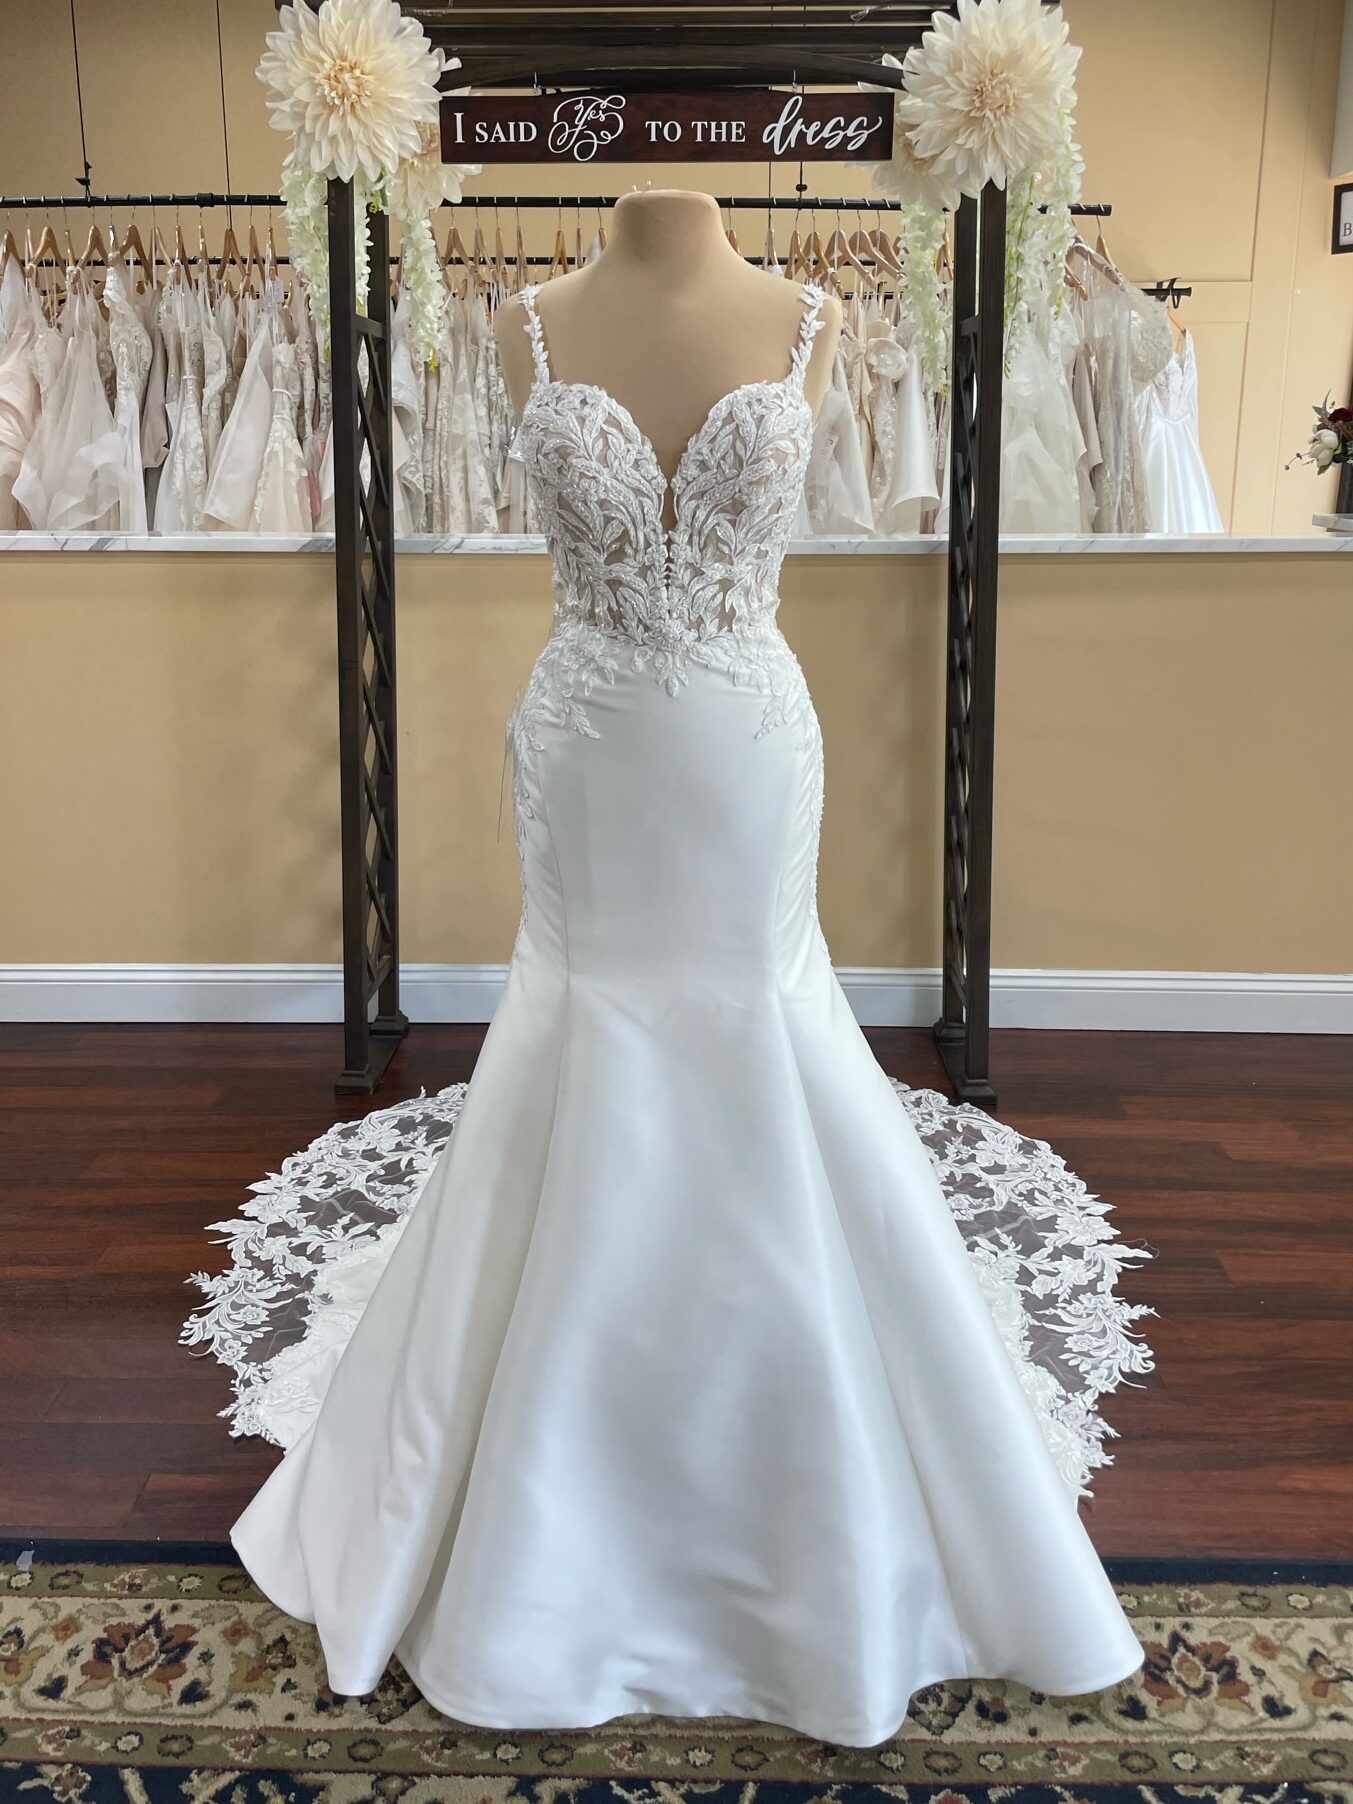 Zuri wedding dress Sophia Tolli is a mikado fit and flare with lace straps, beaded bodice lace, back buttons and illusion lace train